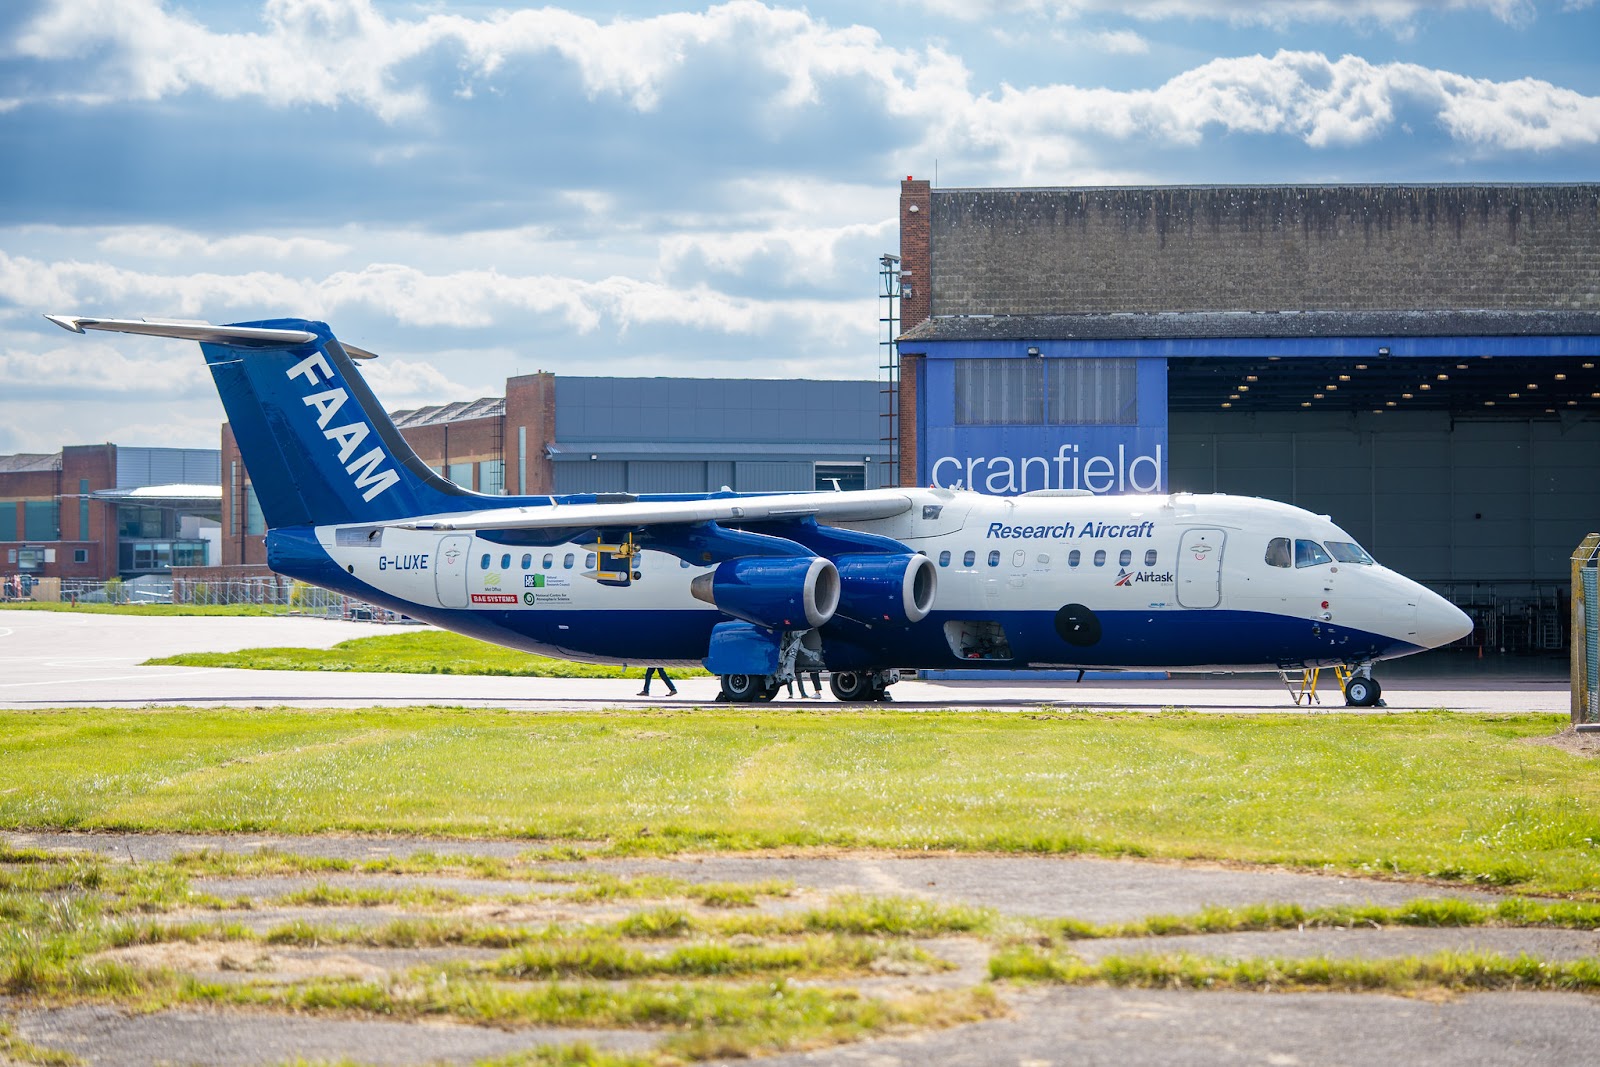 A large blue and white atmospheric research aircraft parked outside a hangar in sunshine.